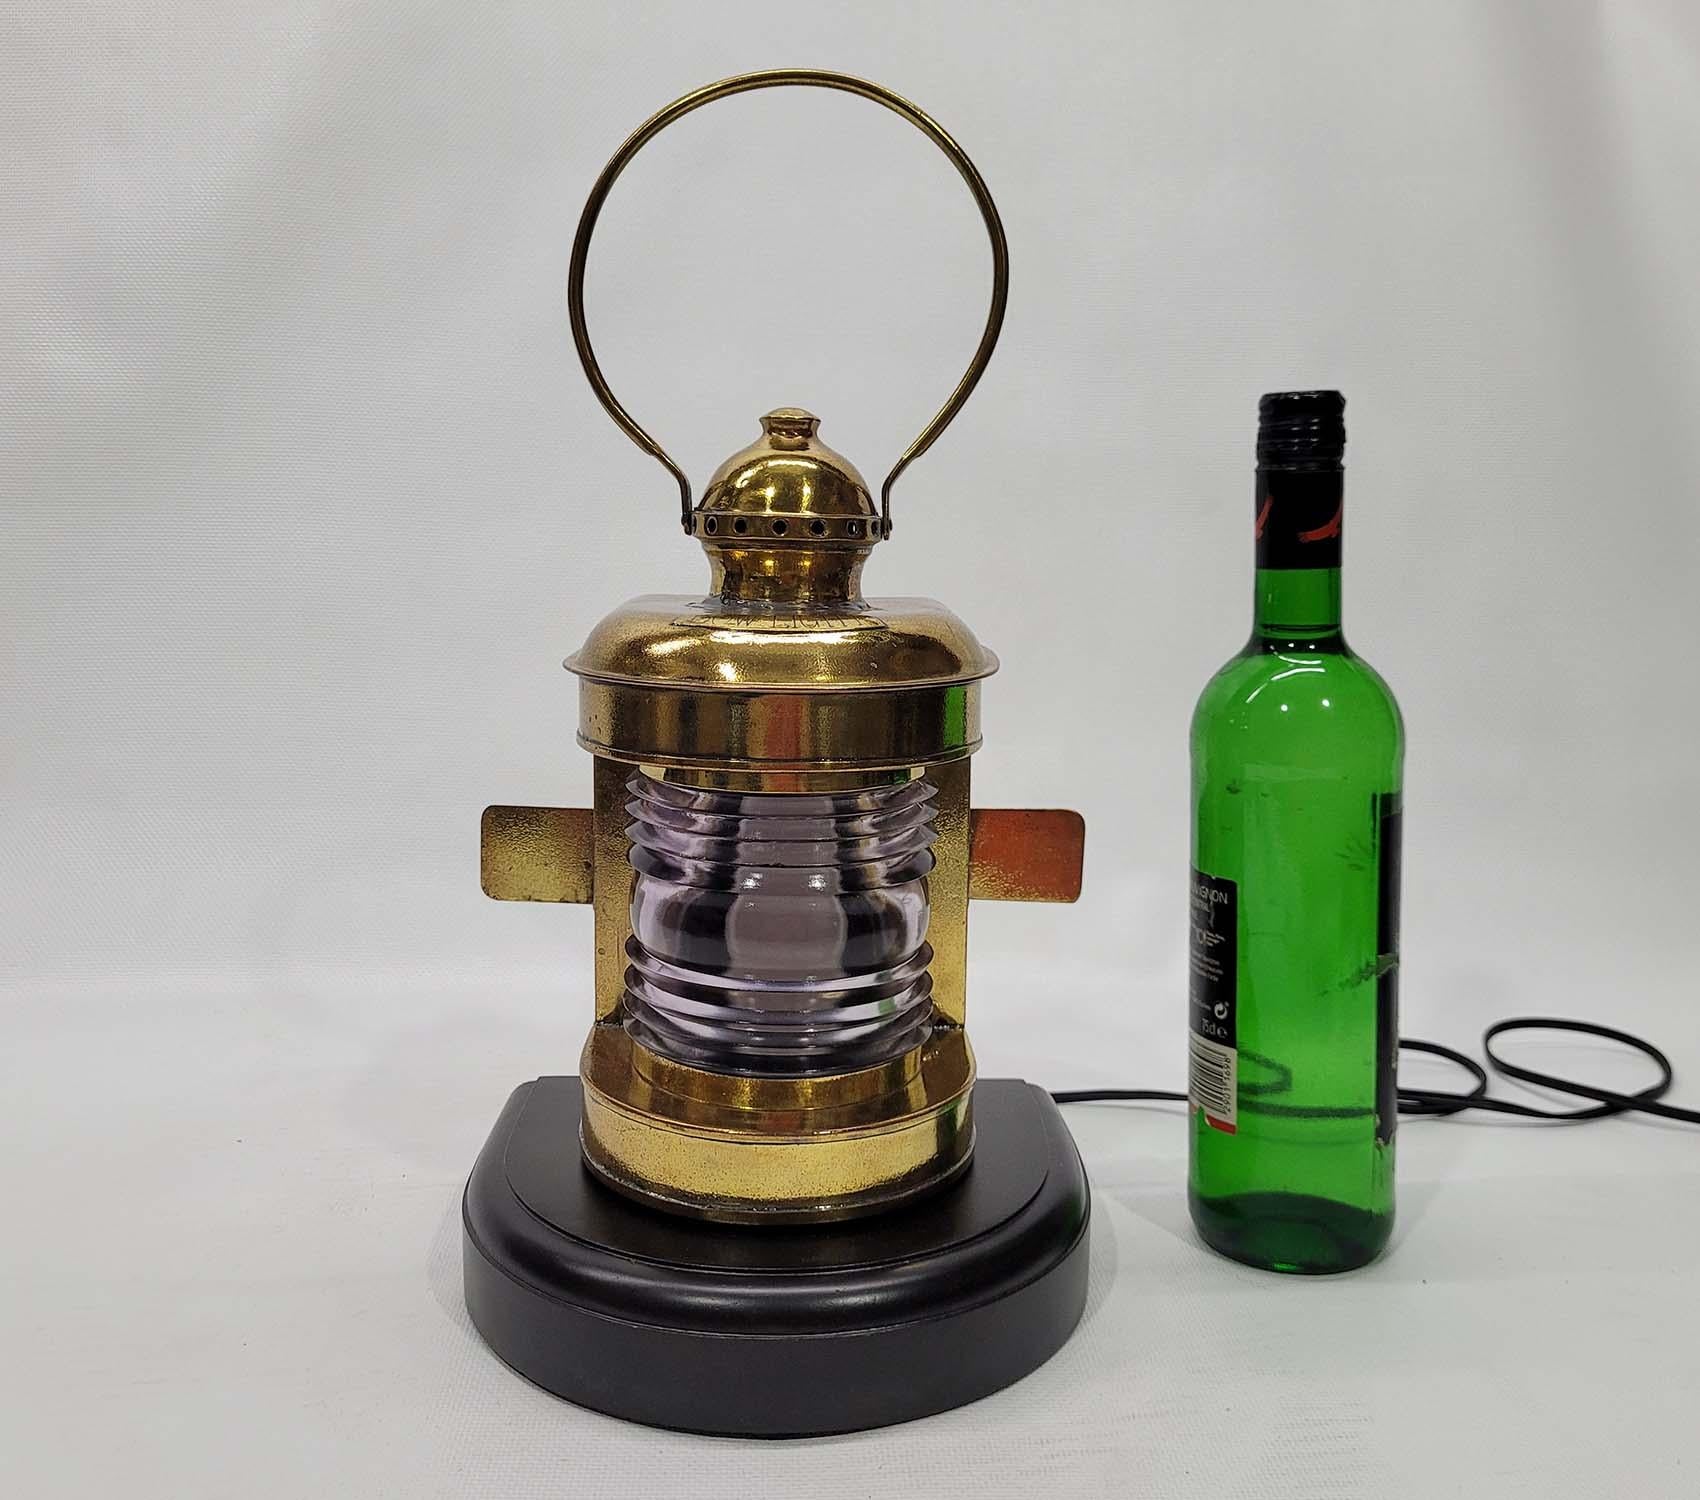 Solid brass masthead lantern with lavender tinted Fresnel lens. Vented top with carry ring. “Bow light” is engraved onto an applied badge soldered to the case. Rewired with electric socket. Mounted to a thick wood base. Circa 1920

Weight: 5